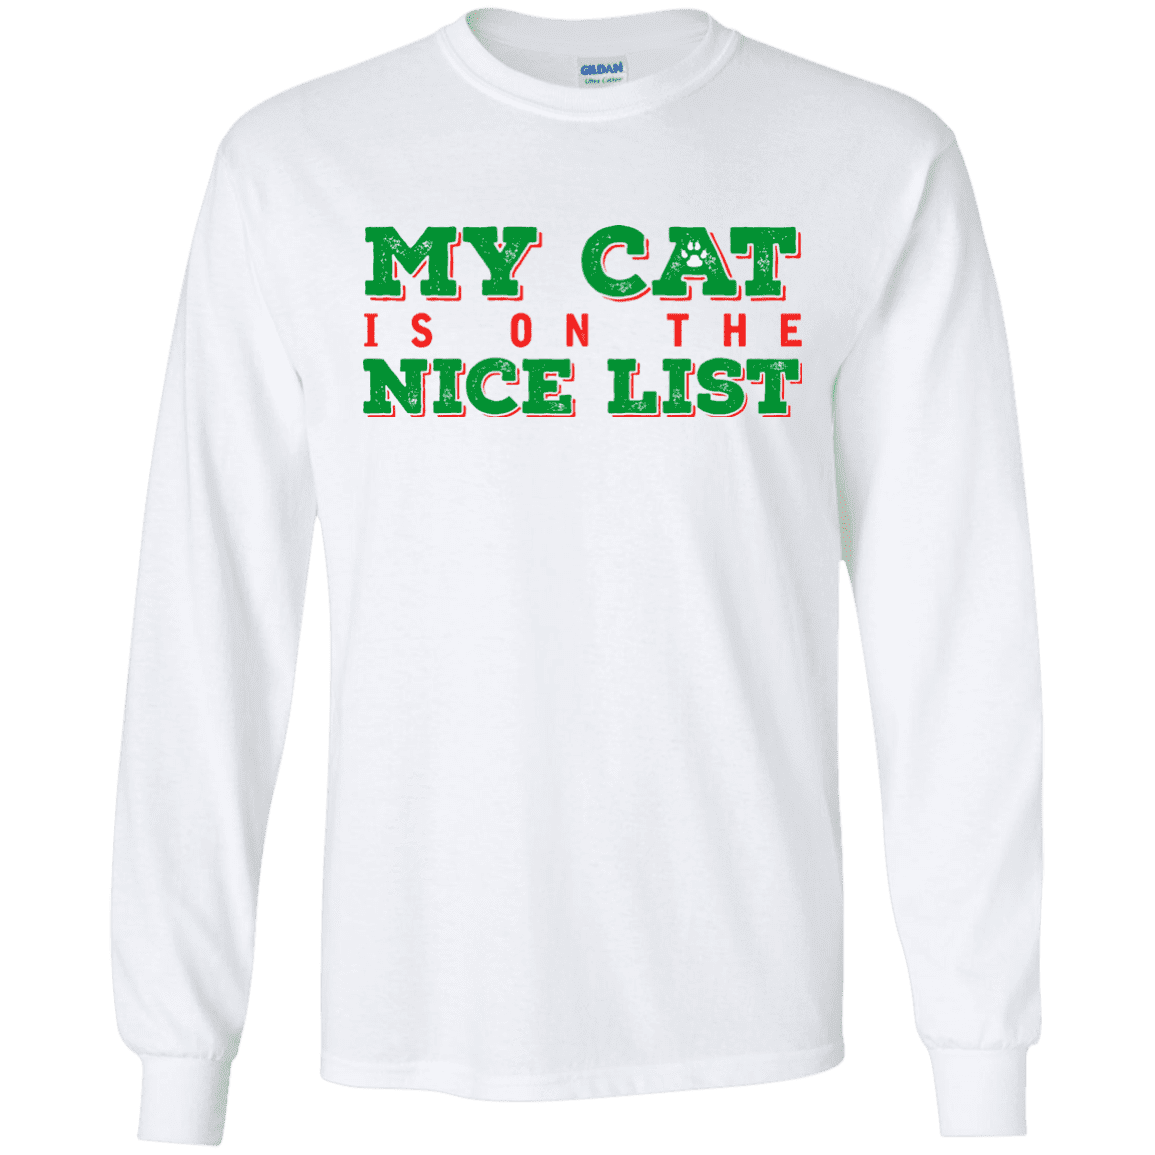 My Cat Is On The Nice List - White Long Sleeve T Shirt.